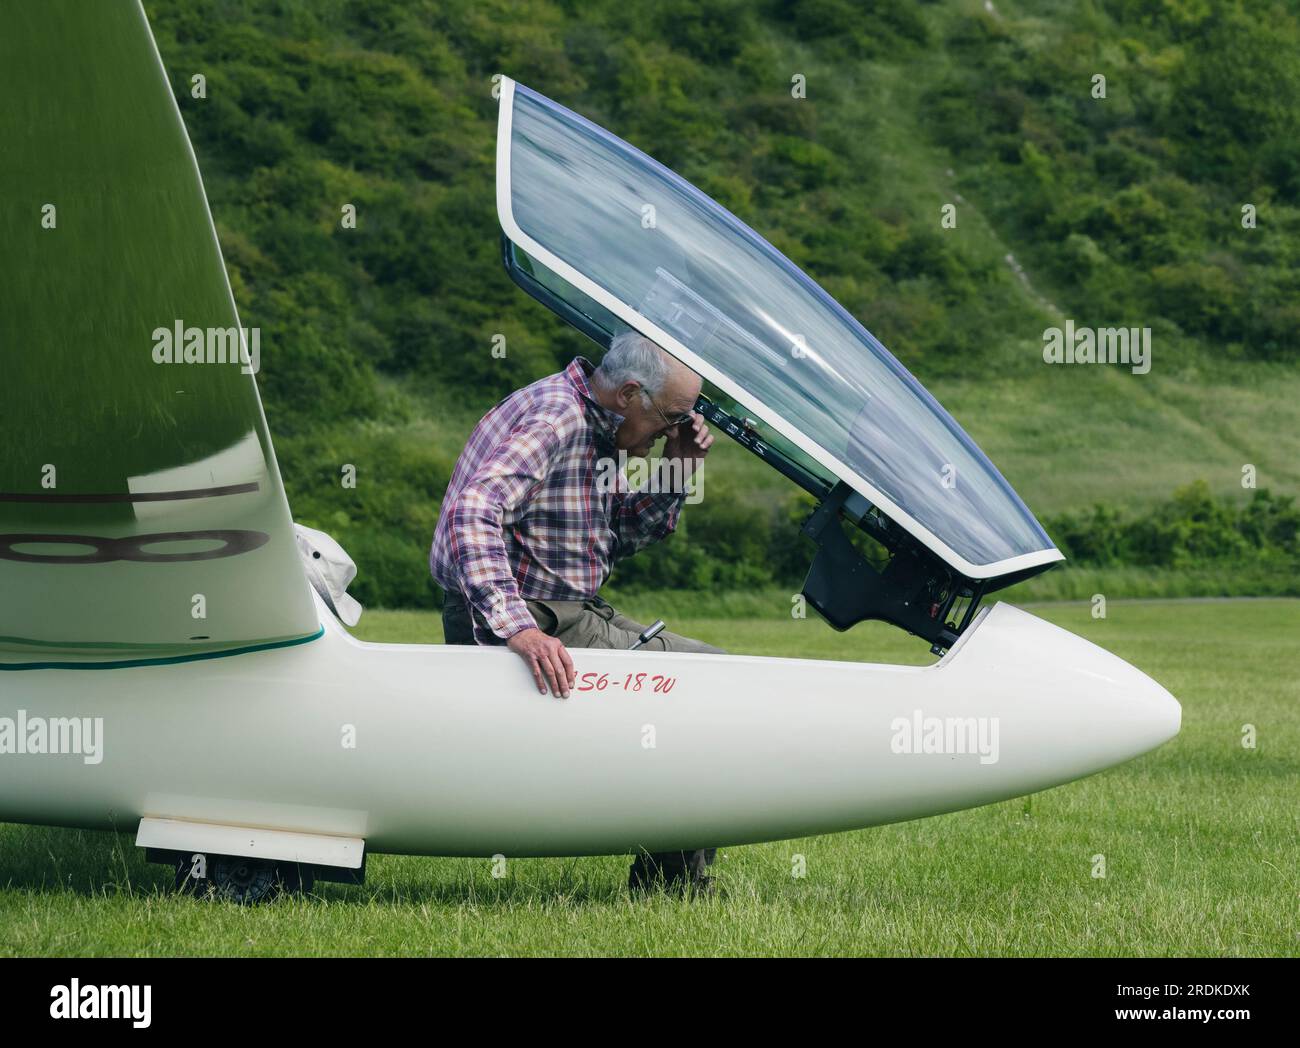 A man checks the dials and condition of his Glider aircraft at an airstrip in England UK Stock Photo